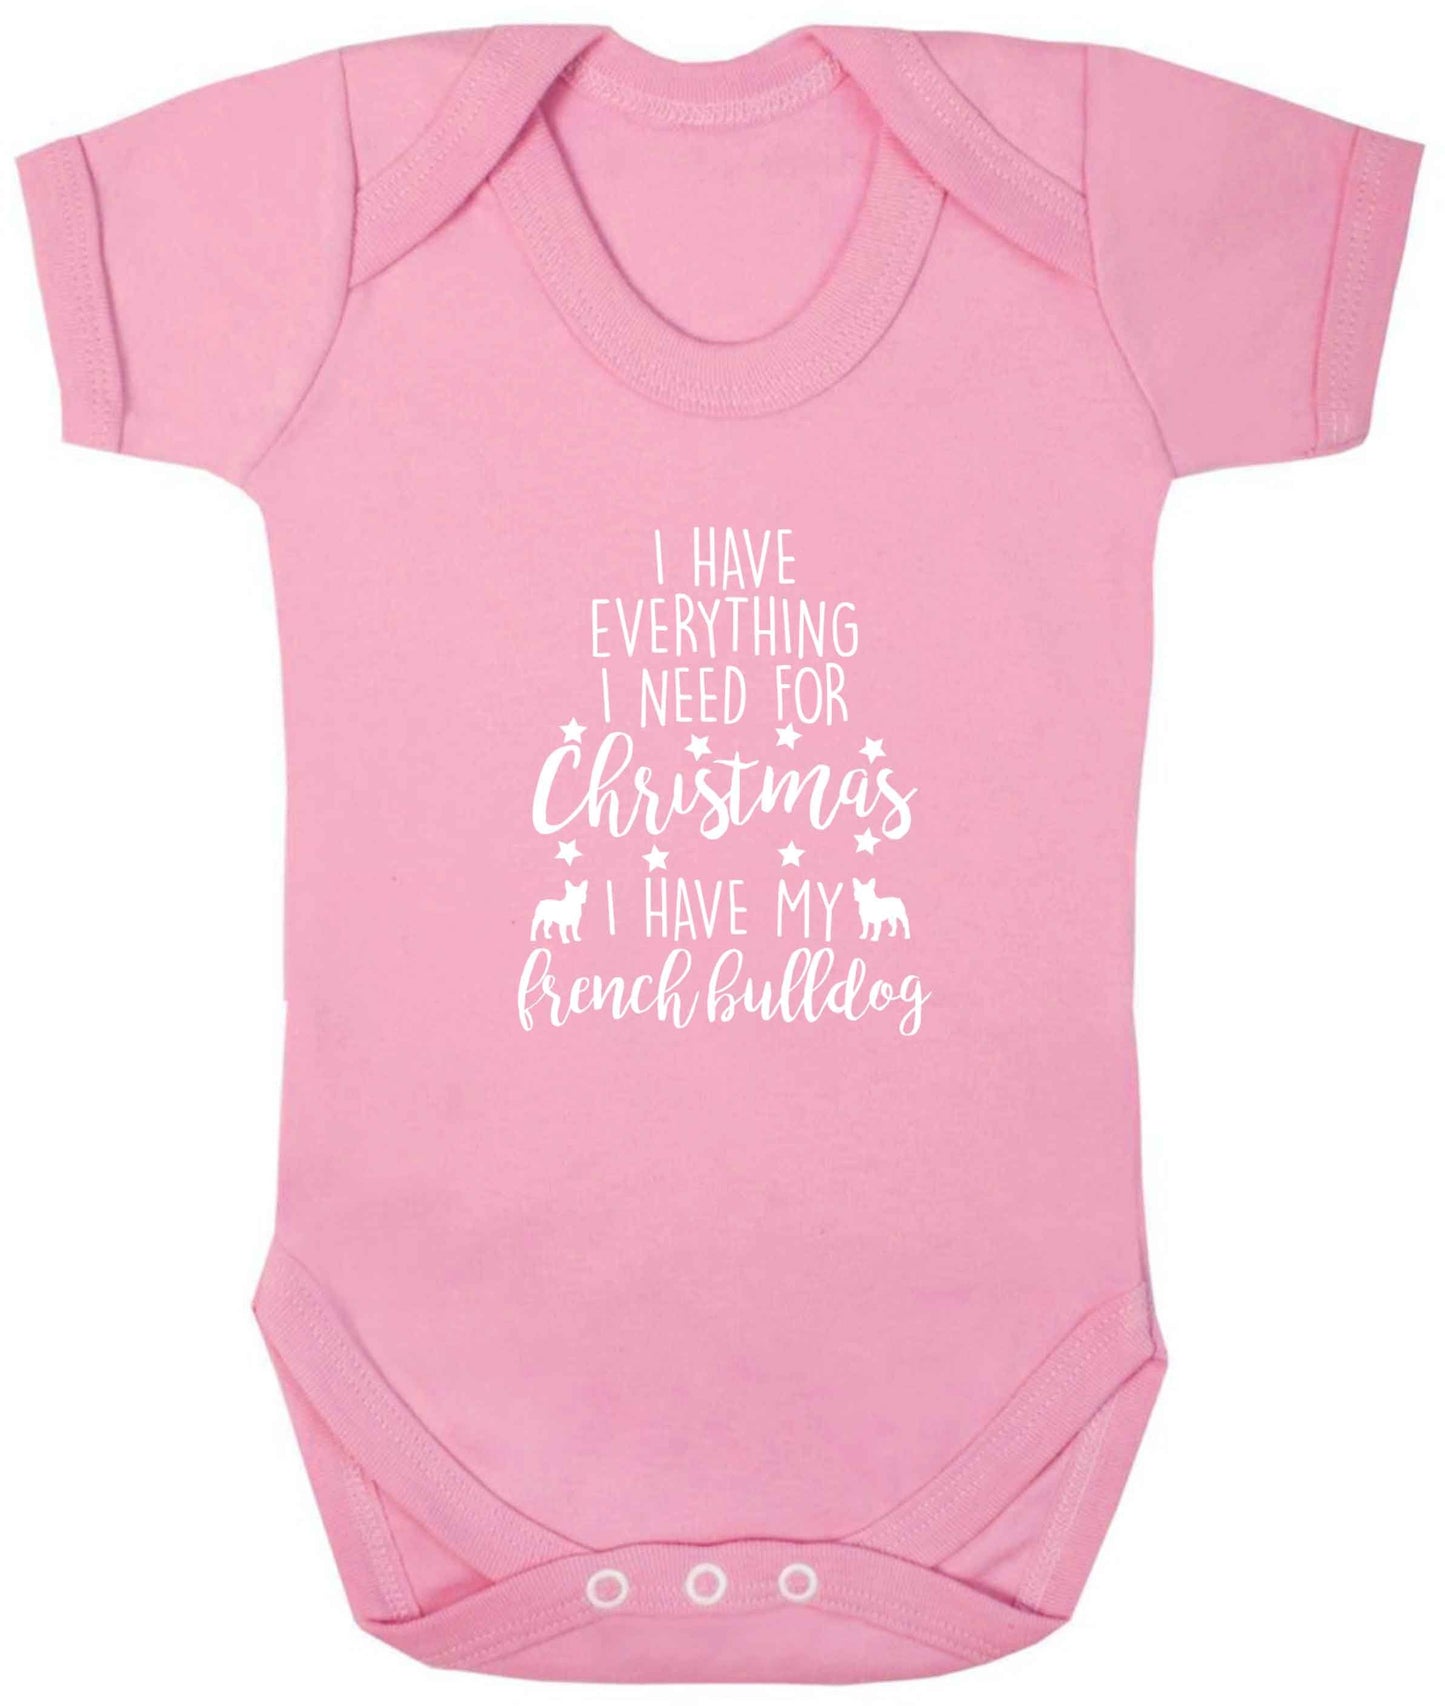 I have everything I need for Christmas I have my french bulldog baby vest pale pink 18-24 months